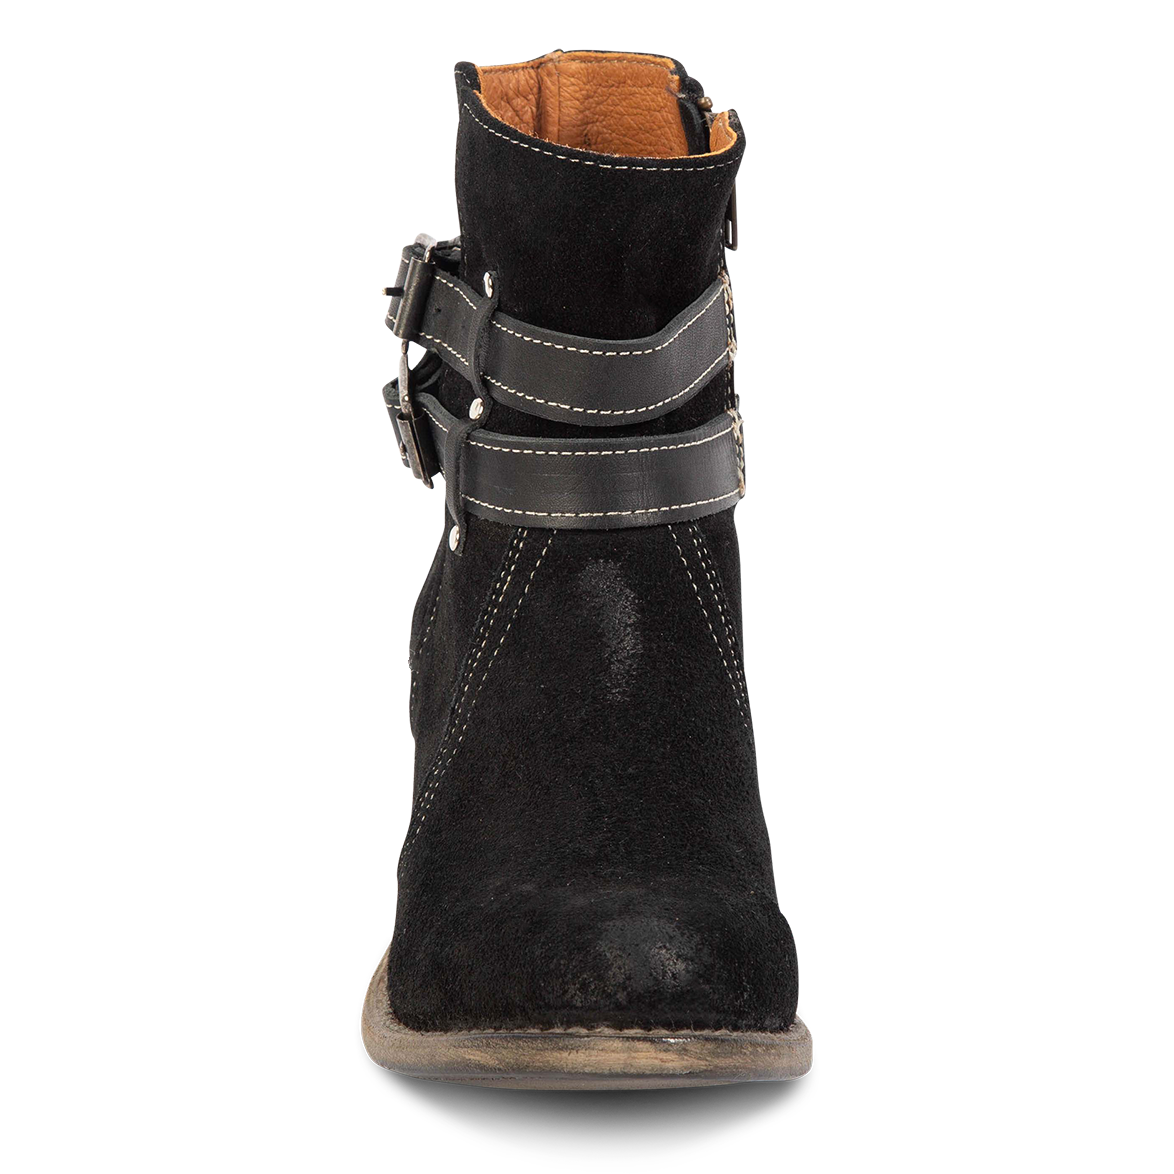 Front view showing contrast stitching on FREEBIRD women's Shiloh black suede leather ankle bootie